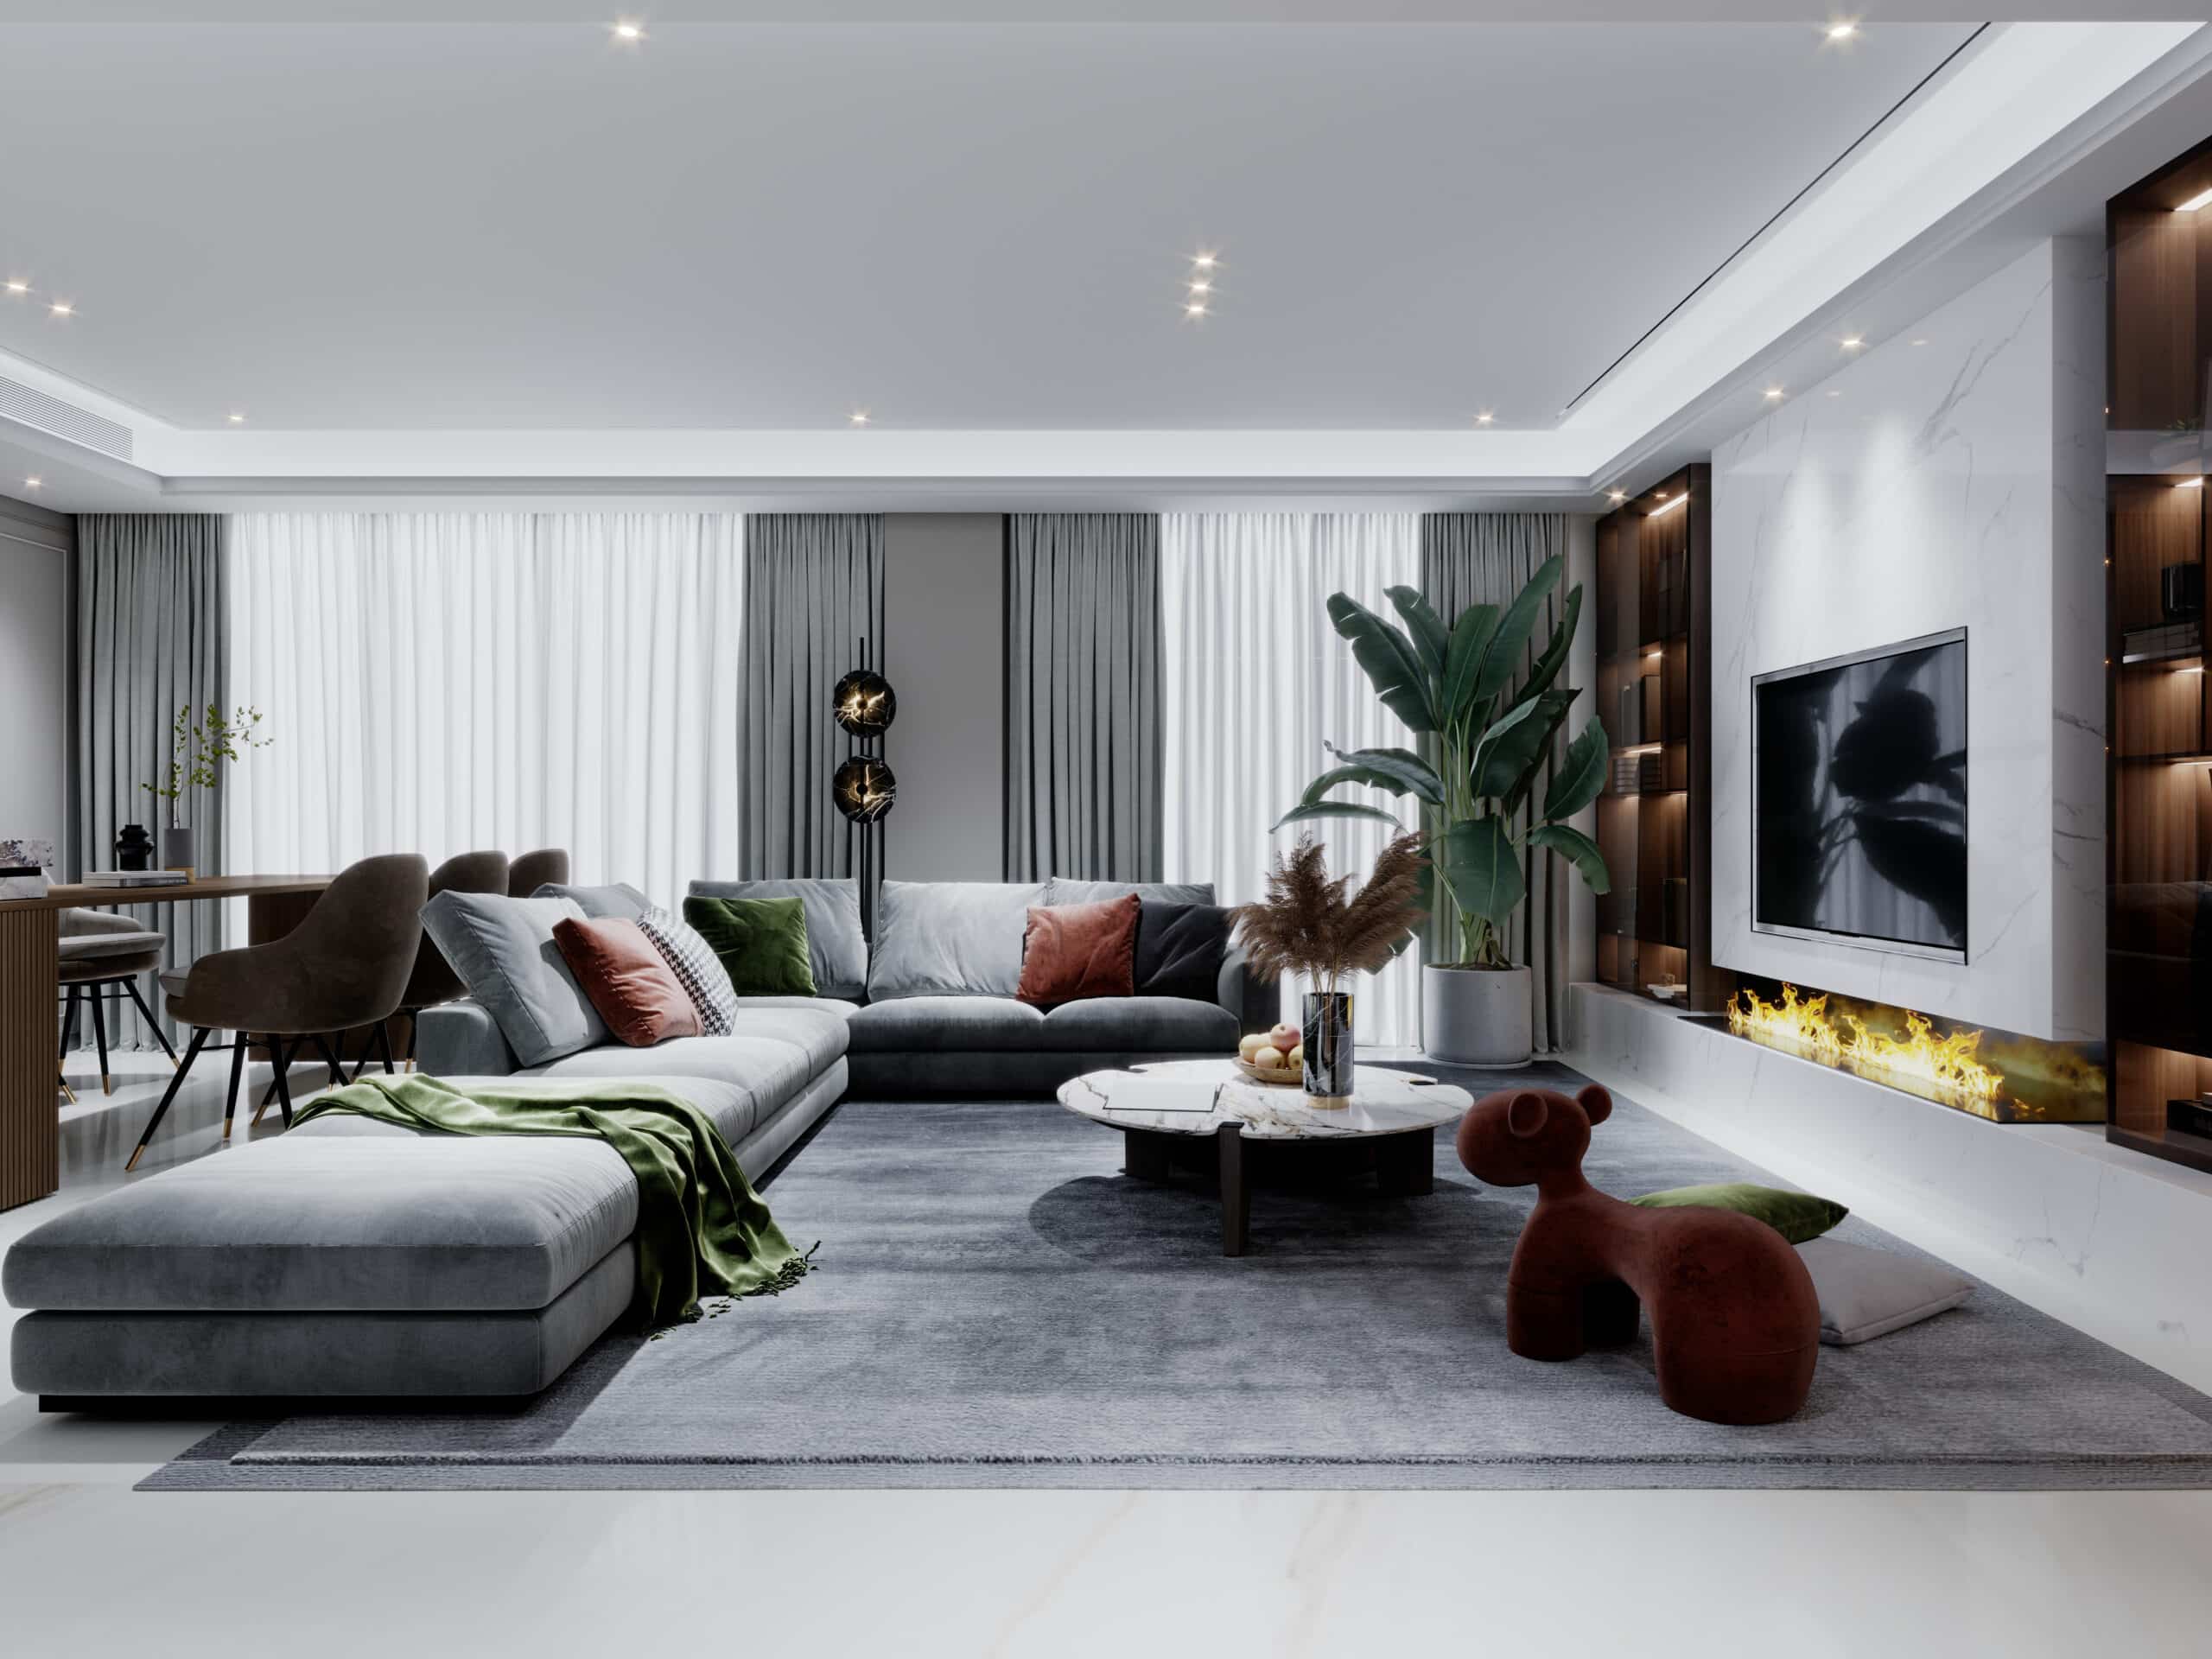 Contemporary living room in white and gray with a large gray color